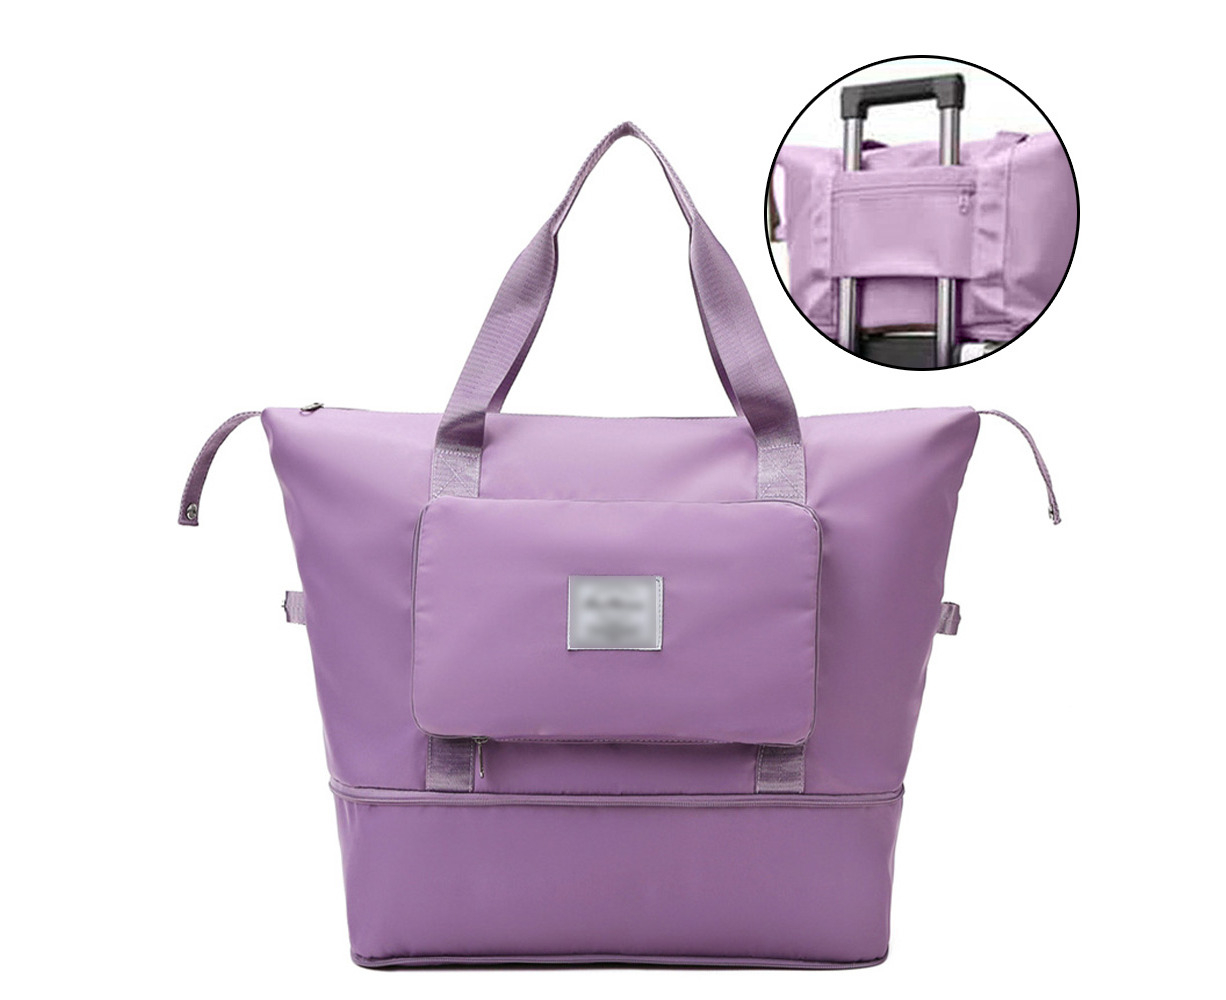 Large Capacity Folding Travel Bag,Travel Lightweight Waterproof Foldable Carry Luggage Duffle Tote Bag Gym Sports Carry-on Bags Folding Travel Bag Purple 